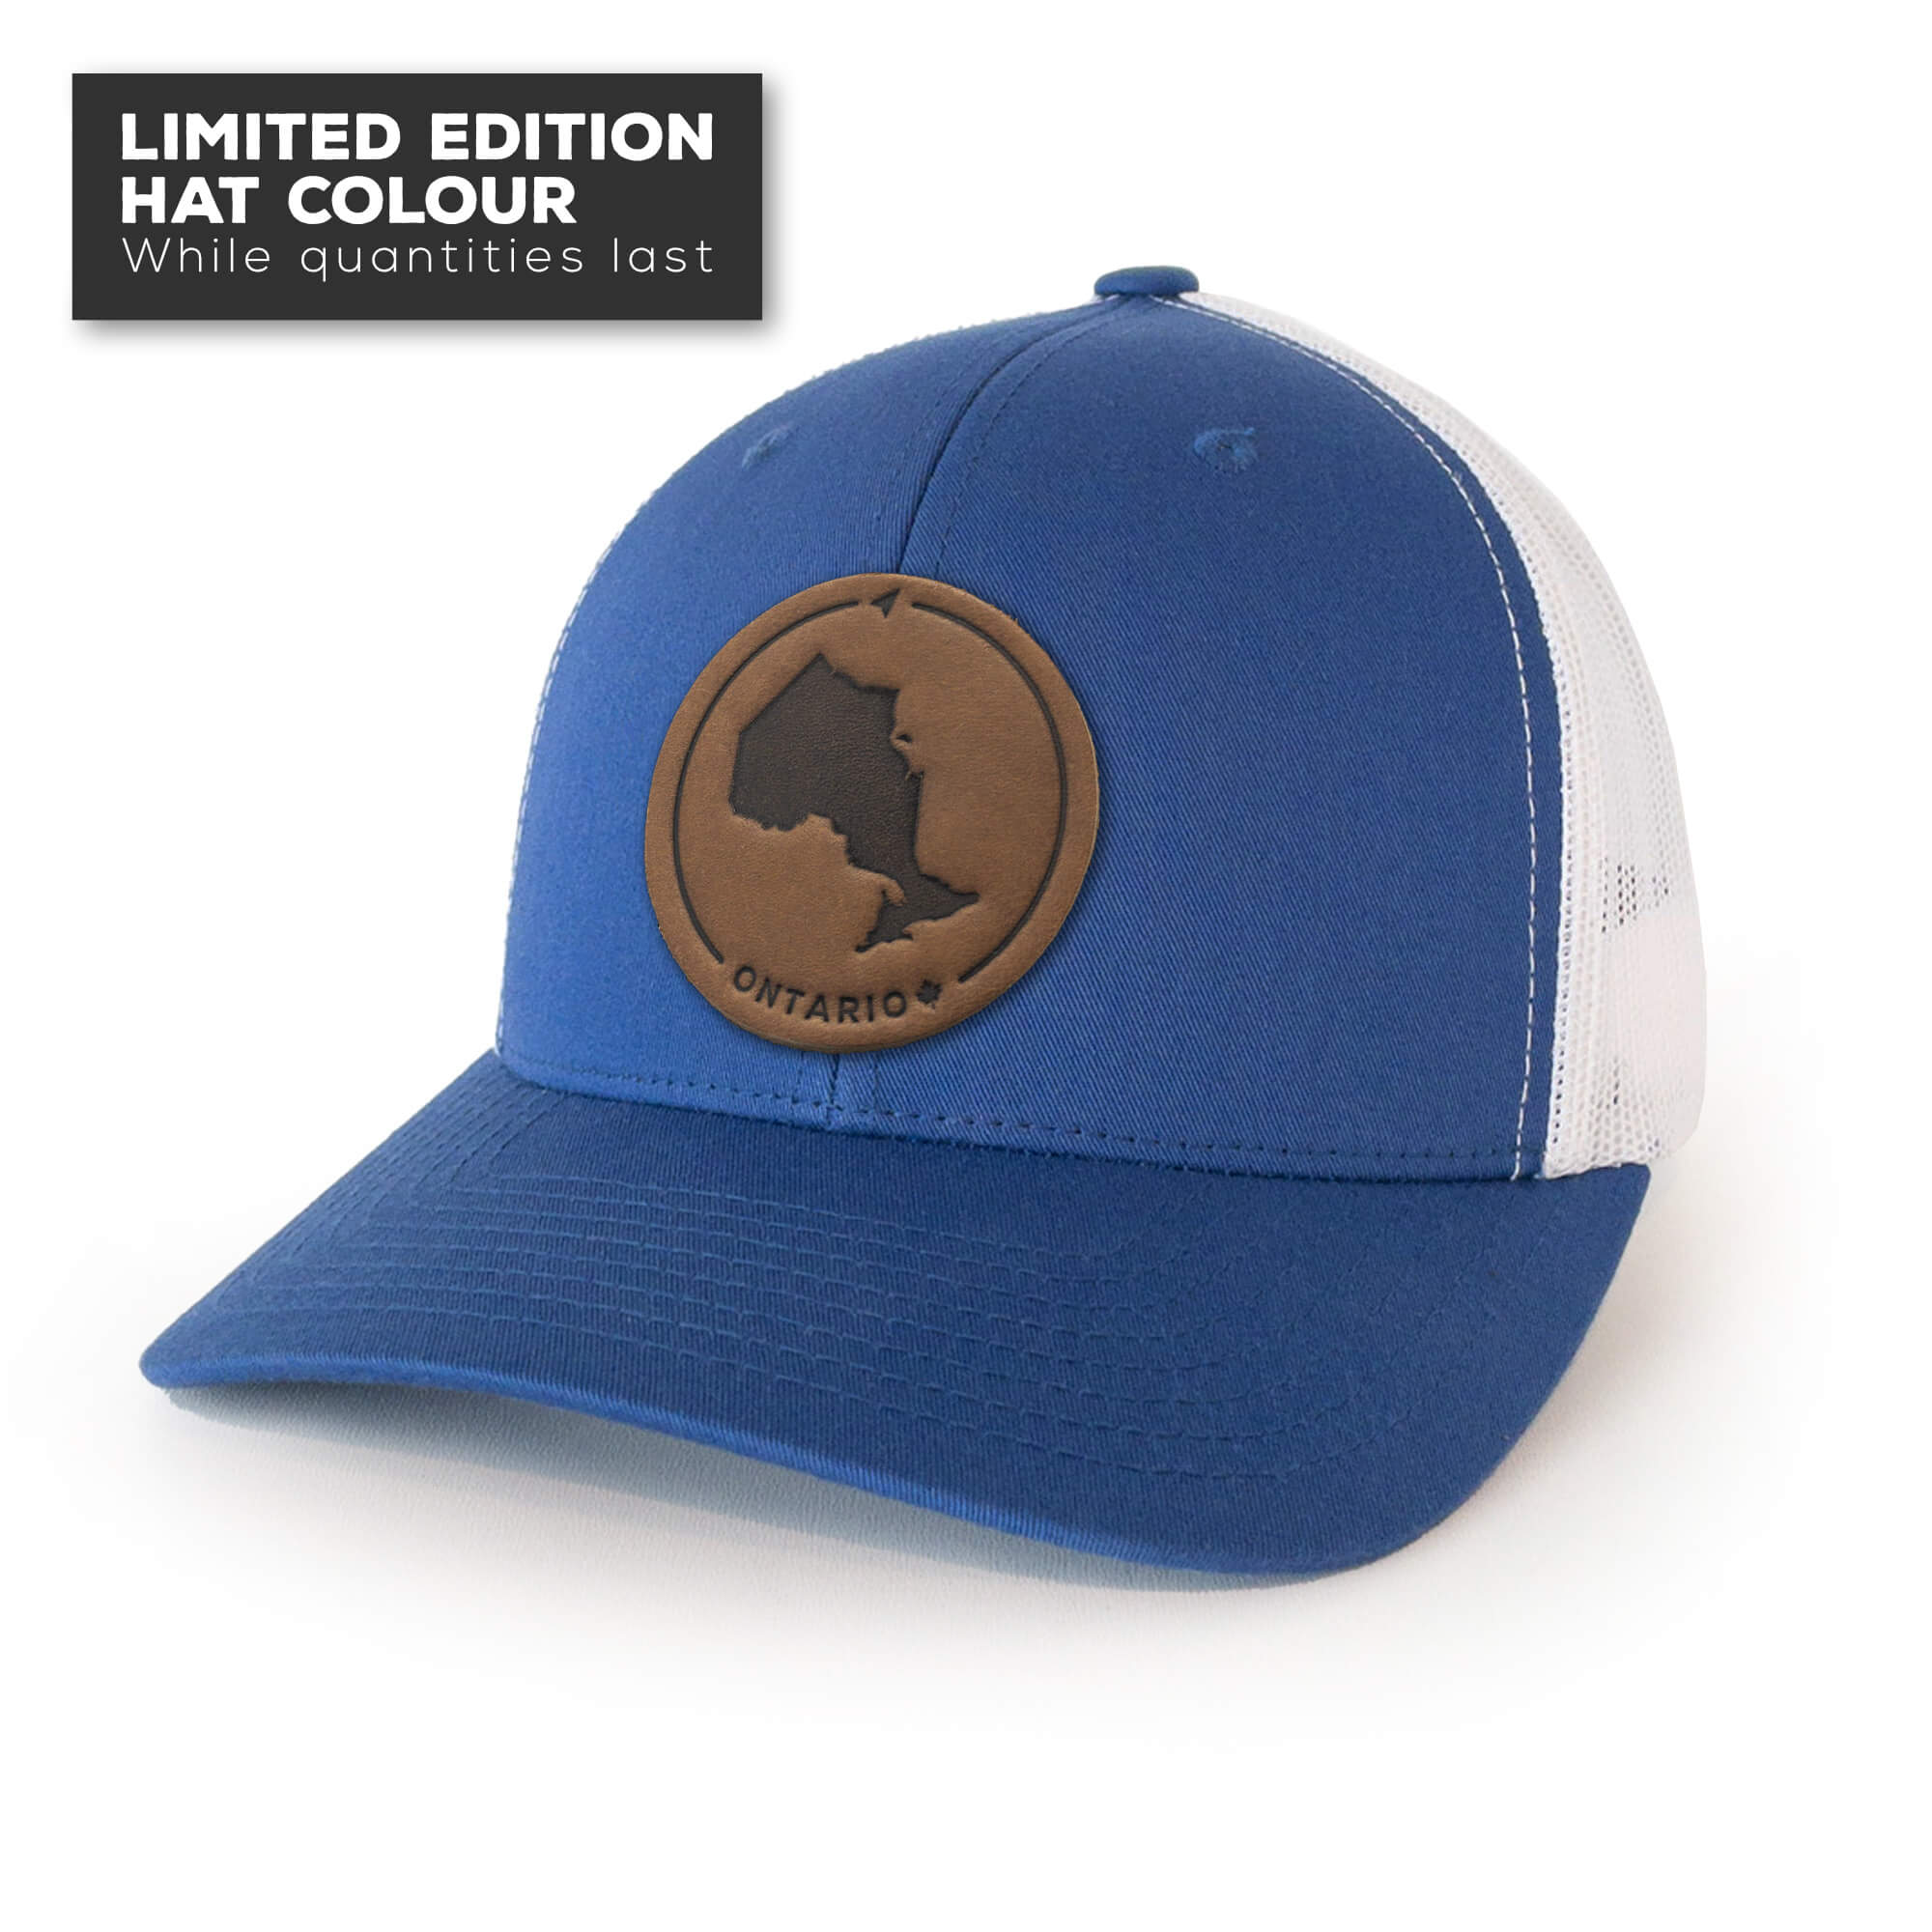 Royal Blue trucker hat with full-grain leather patch of Ontario